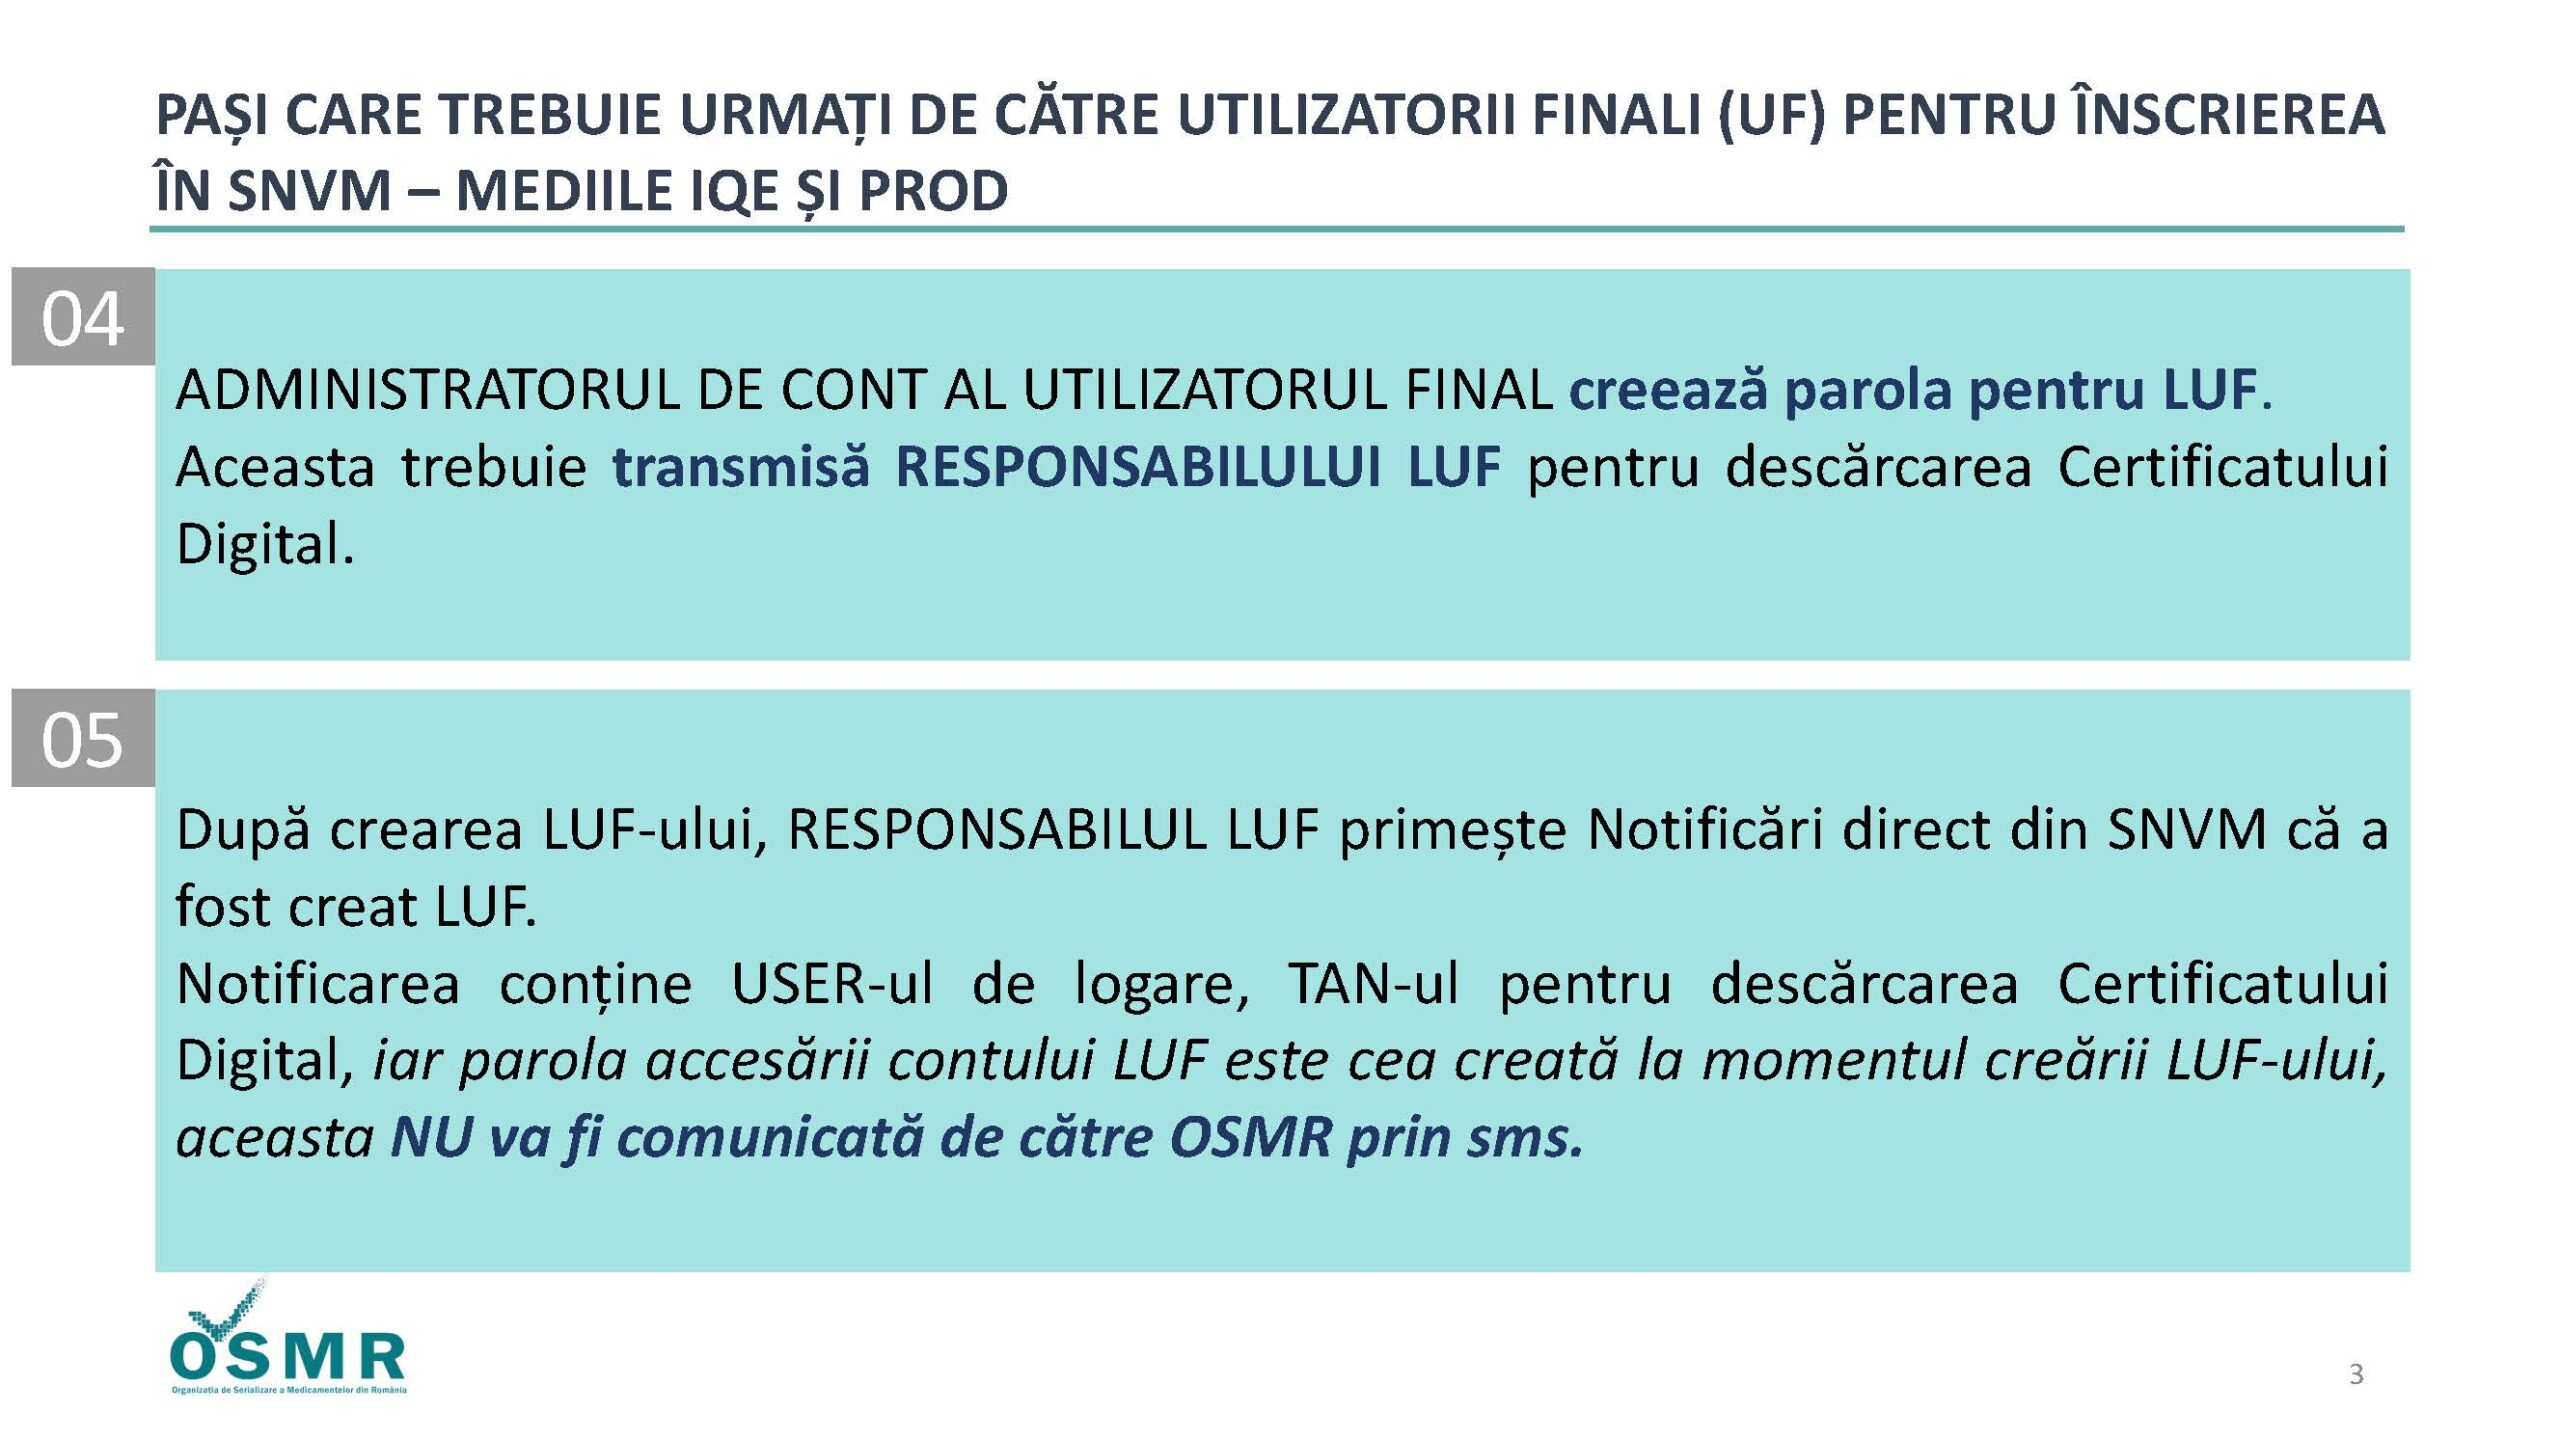 Pasi inscriere in OSMR SNVM Page 3 scaled